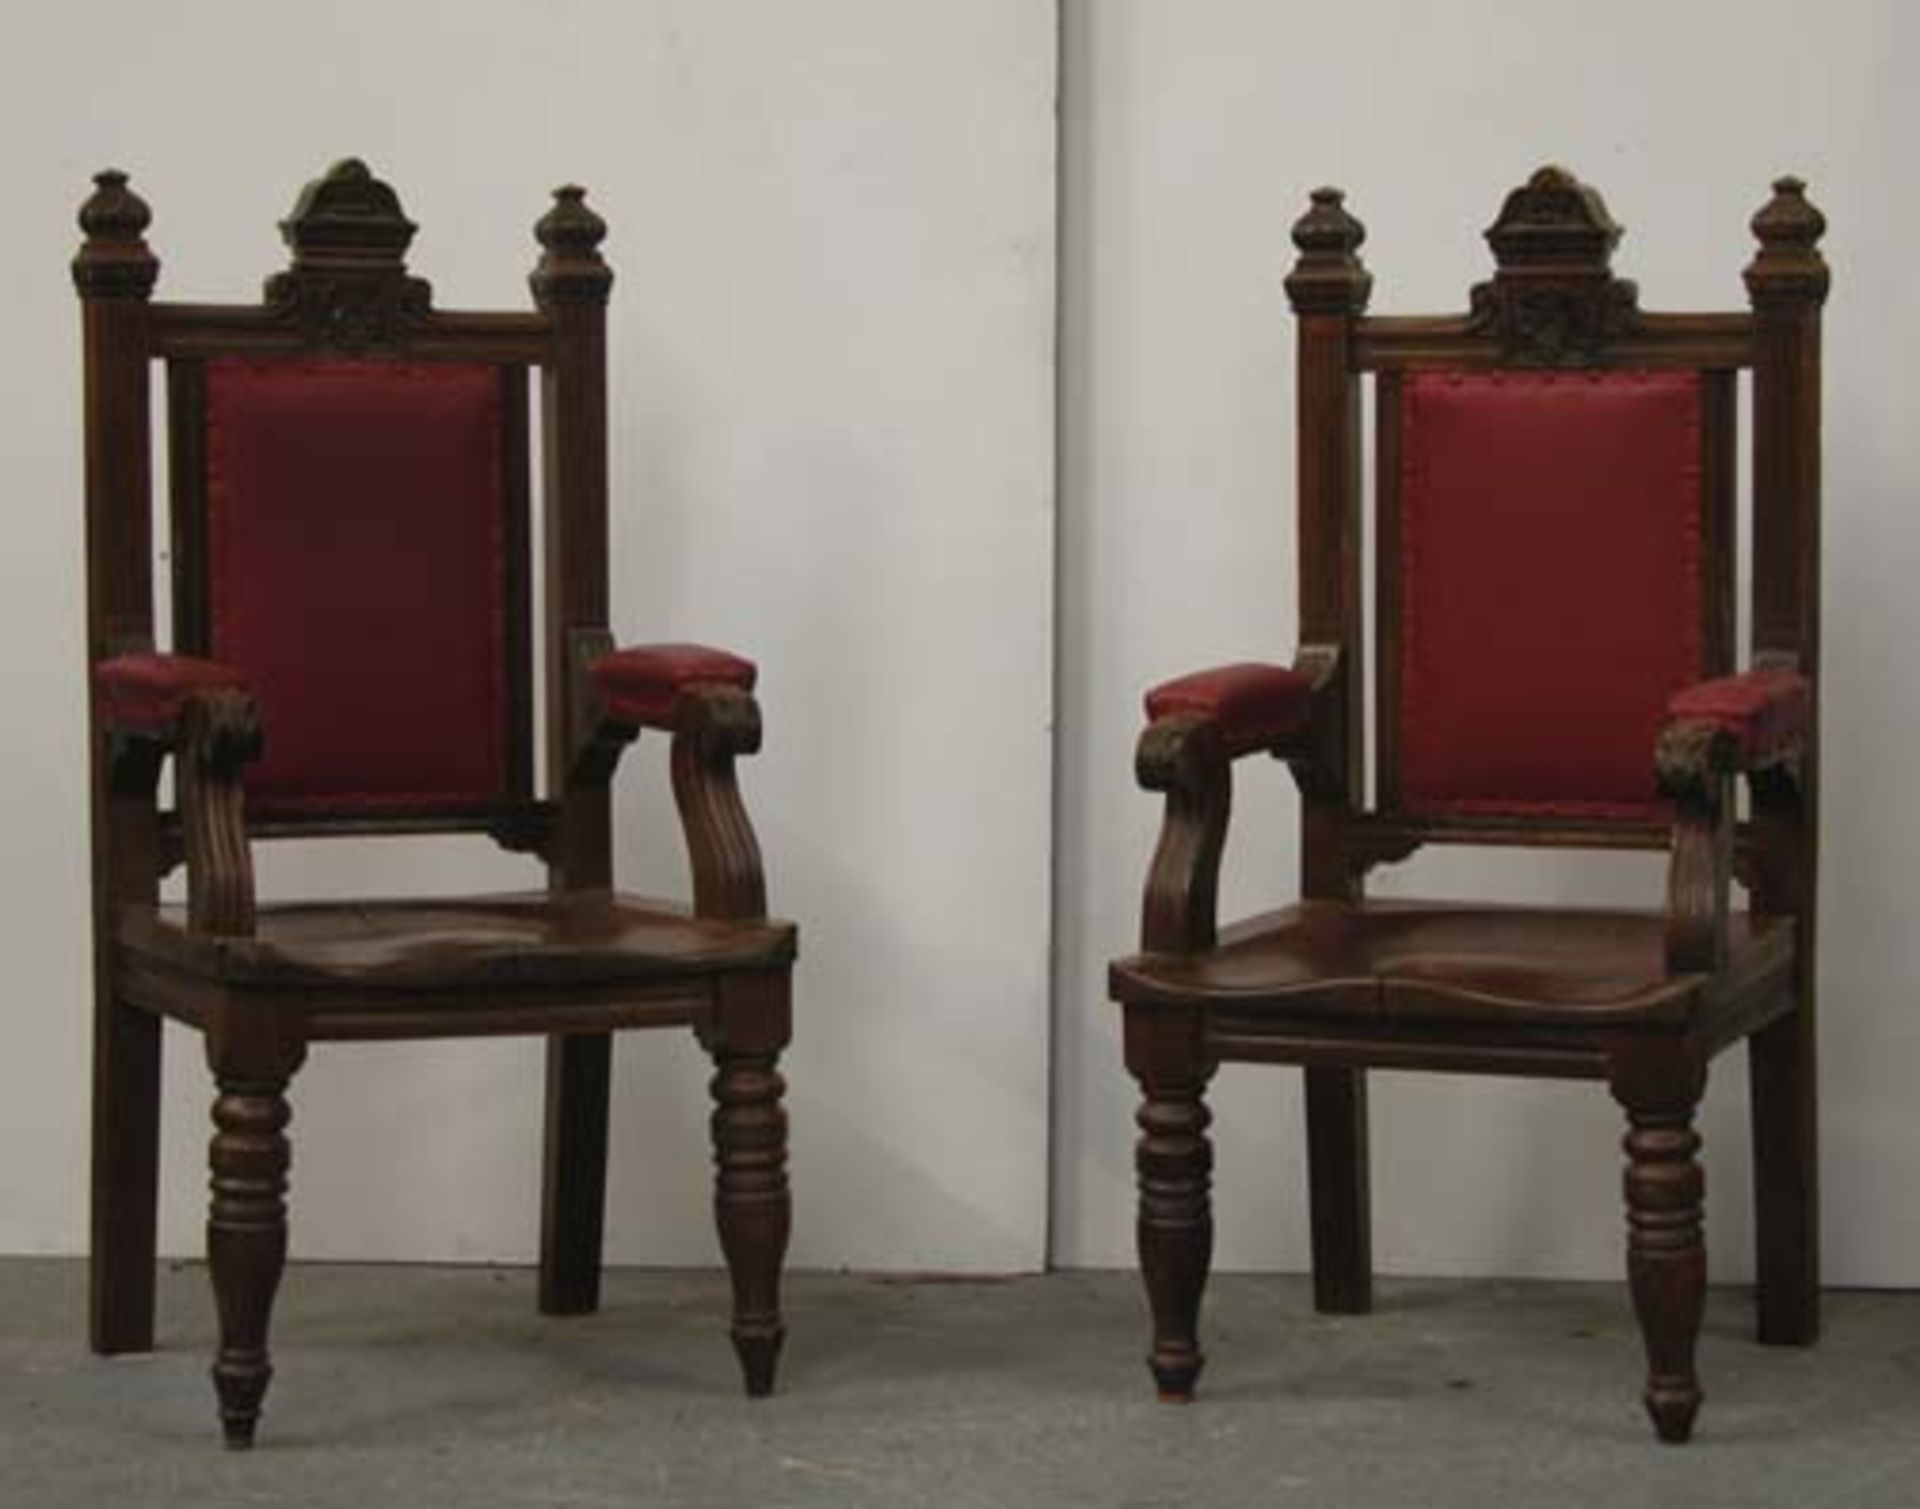 *PAIR OF CARVED OAK CHAIRS, CIRCA 1890. HEIGHT 1315MM (51.8IN) X WIDTH 598MM (23.5IN) X DEPTH